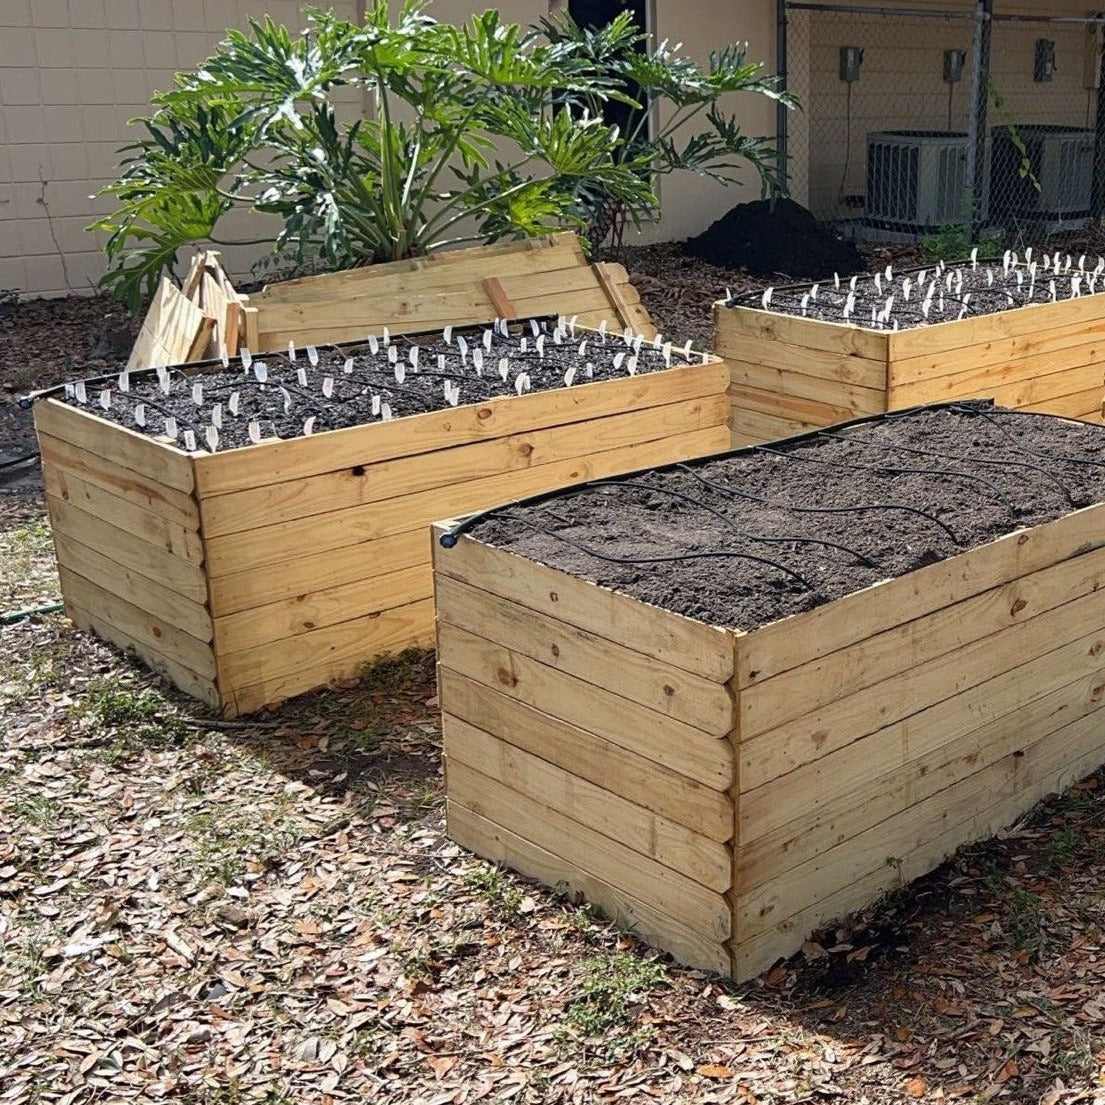 4 pressure treated raised garden beds installed at your location.